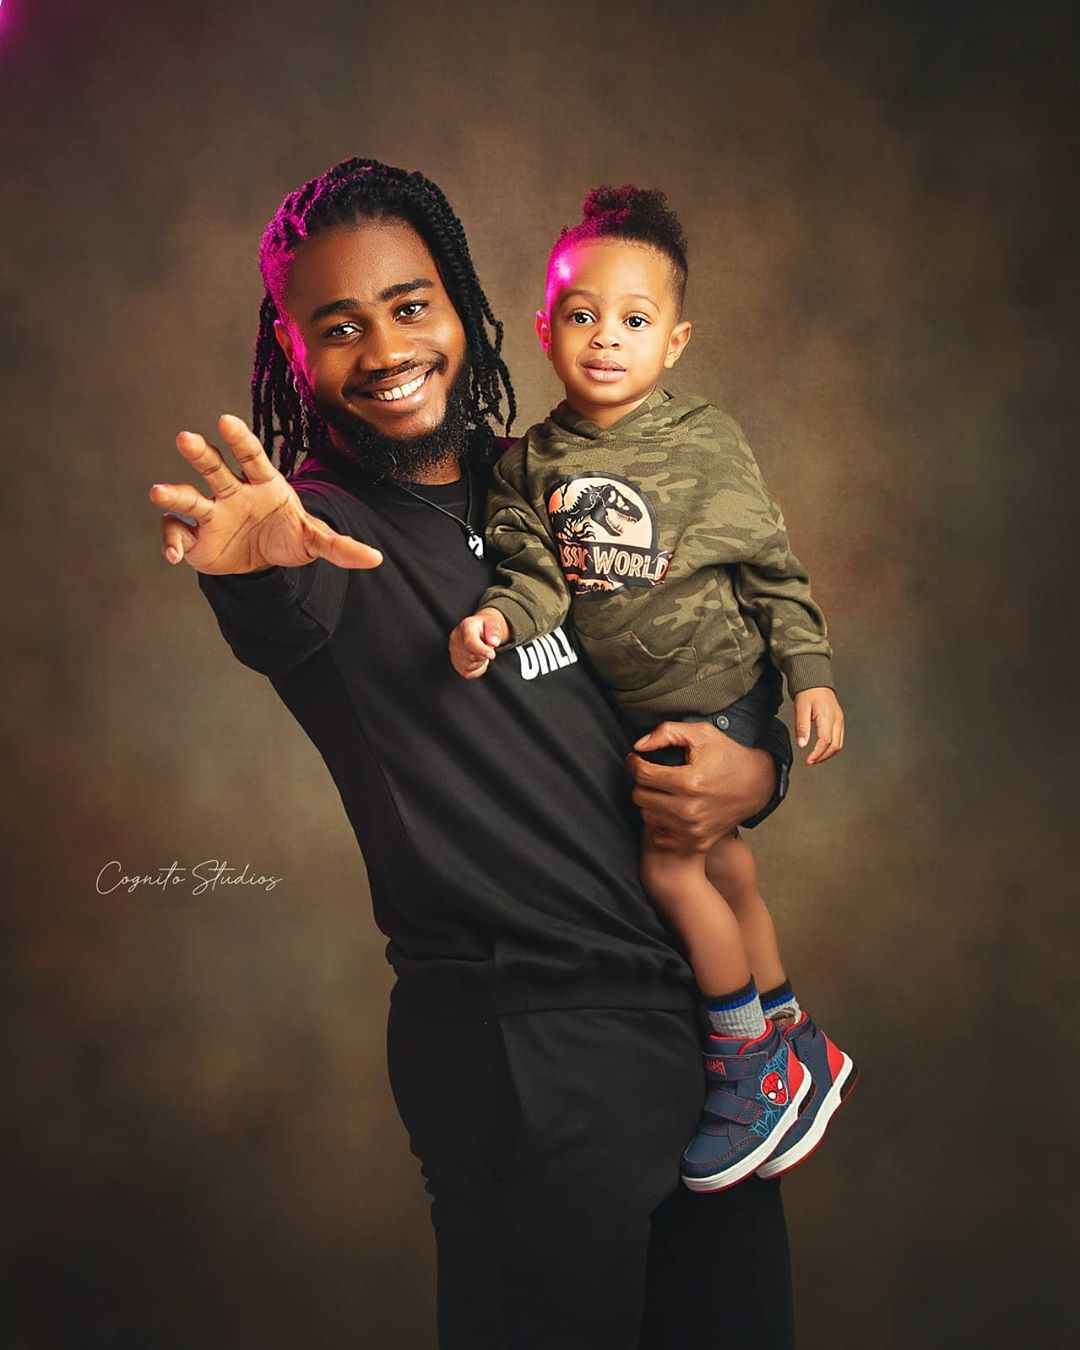 Praise Nelson And Son Looking Amazing In New Pictures 12379597_itzpraise11985886436319953668825156270369496650939514n_jpeg1e953e2d582420036784a14b6277112a